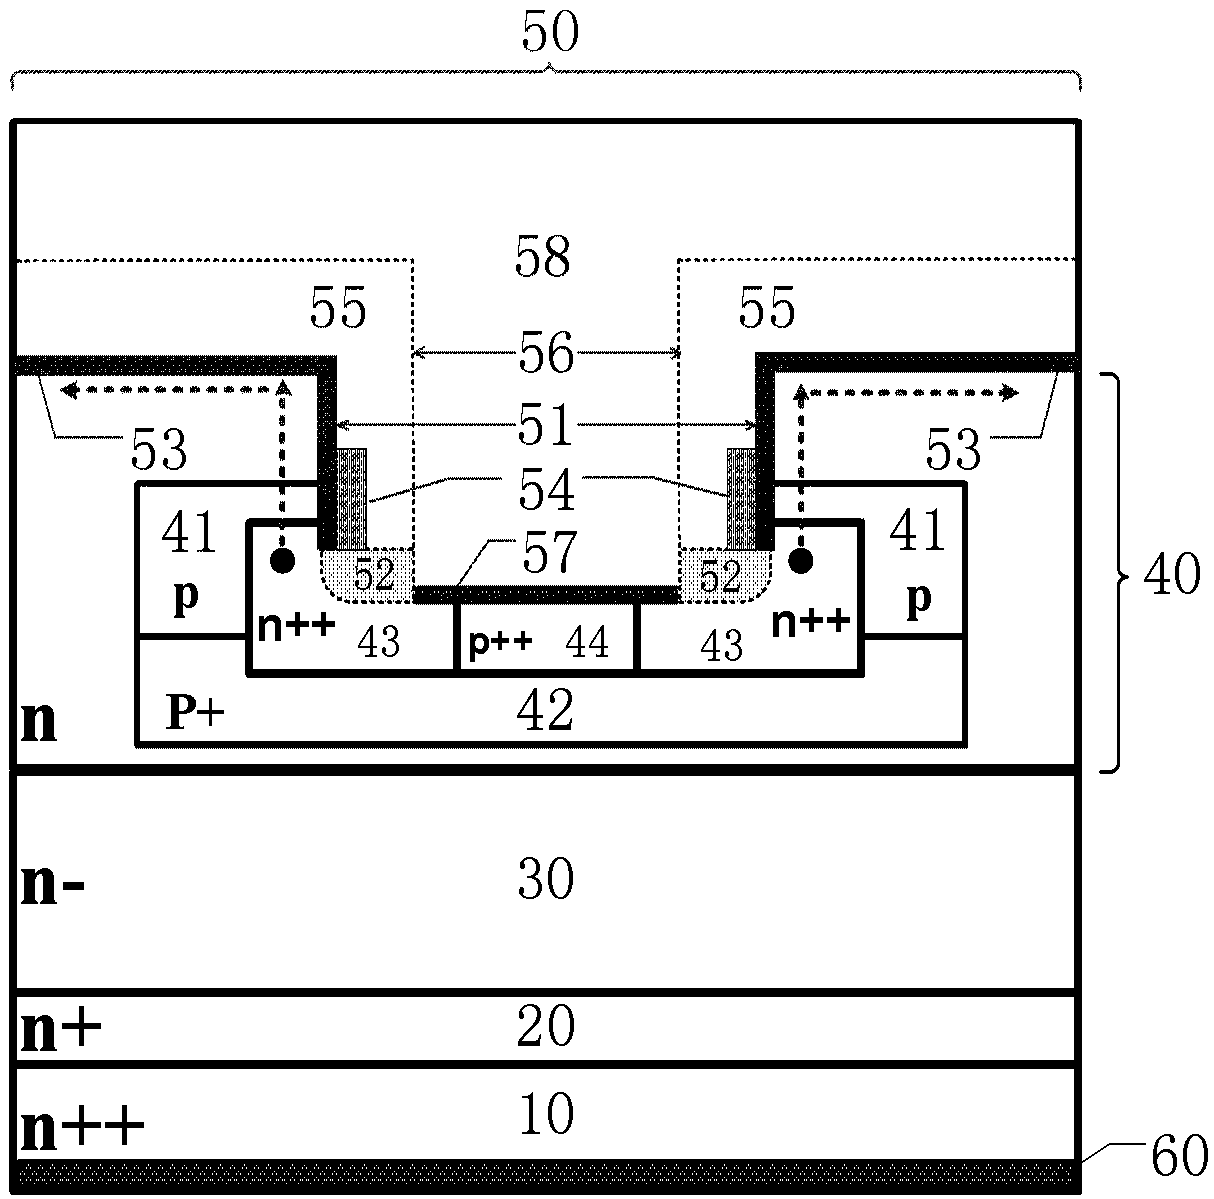 Silicon carbide groove-shaped metal-oxide-semiconductor field-effect transistors (MOSFETs) and fabrication method thereof